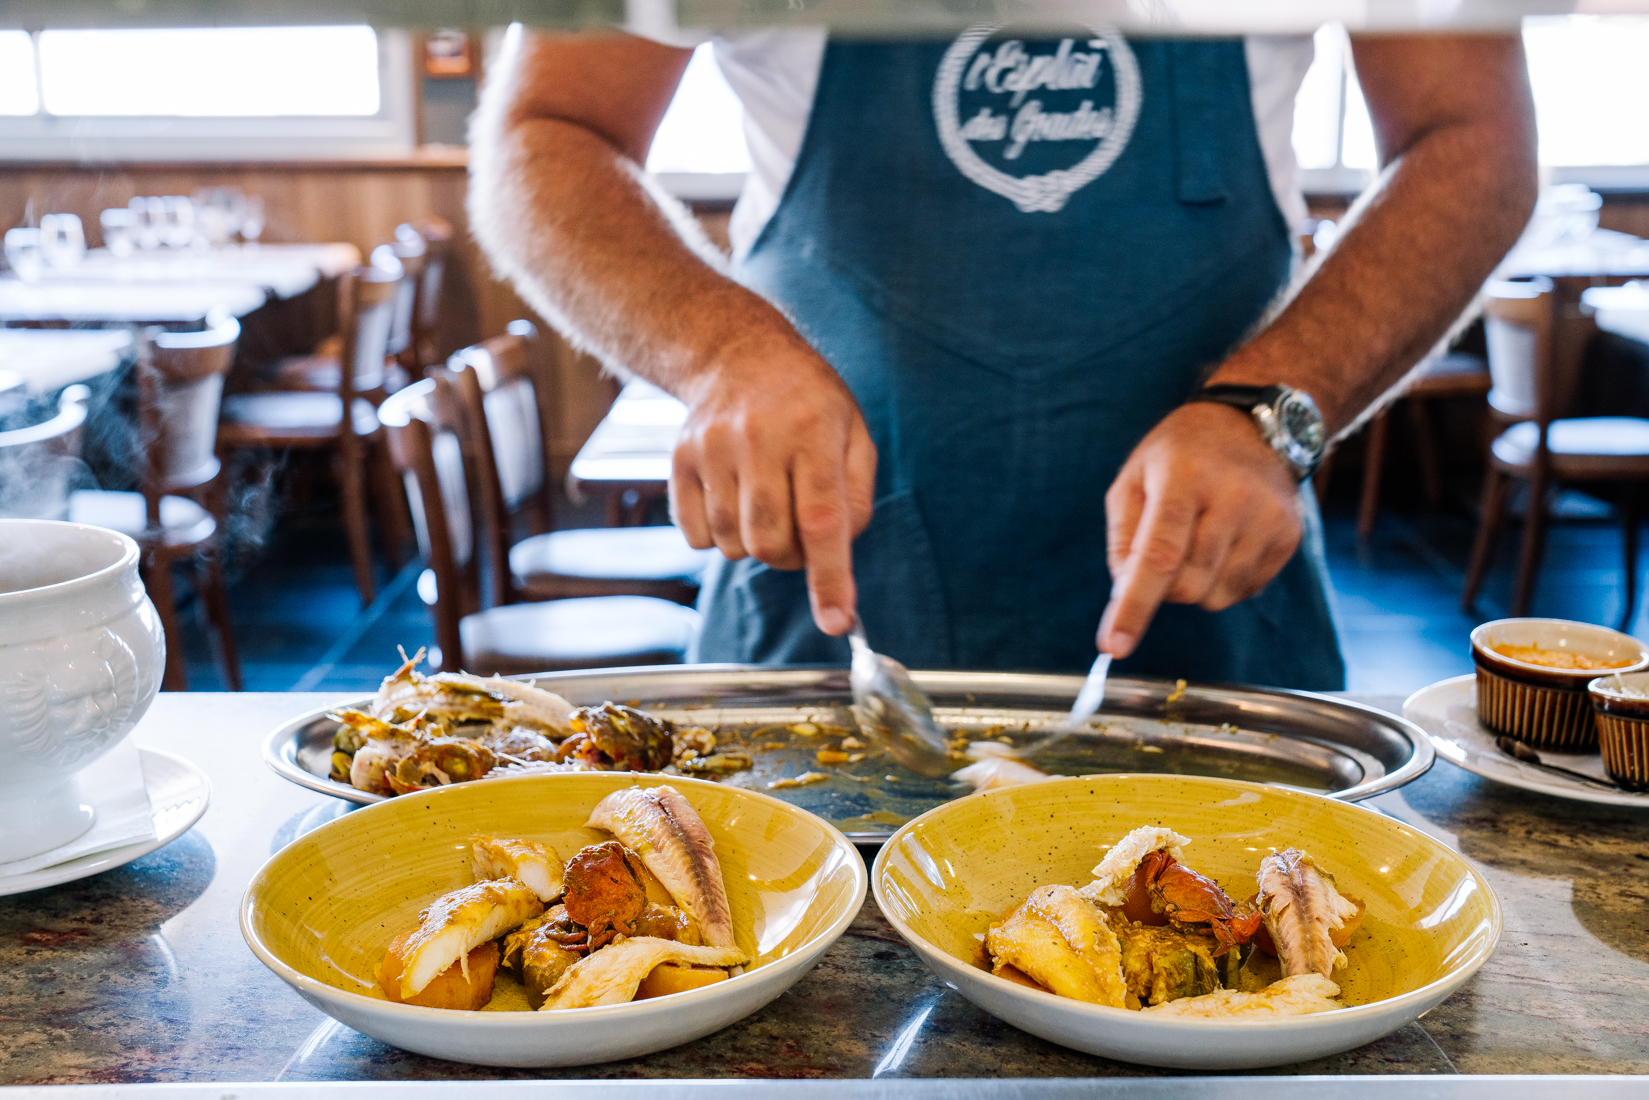  Bouillabaisse: CCutting the cooked fish and serving in into bowls with the fish soup at L'Esplai du Grand Bar des Goudes.  Photo by hospitality and restaurant photographer Clara Tuma 